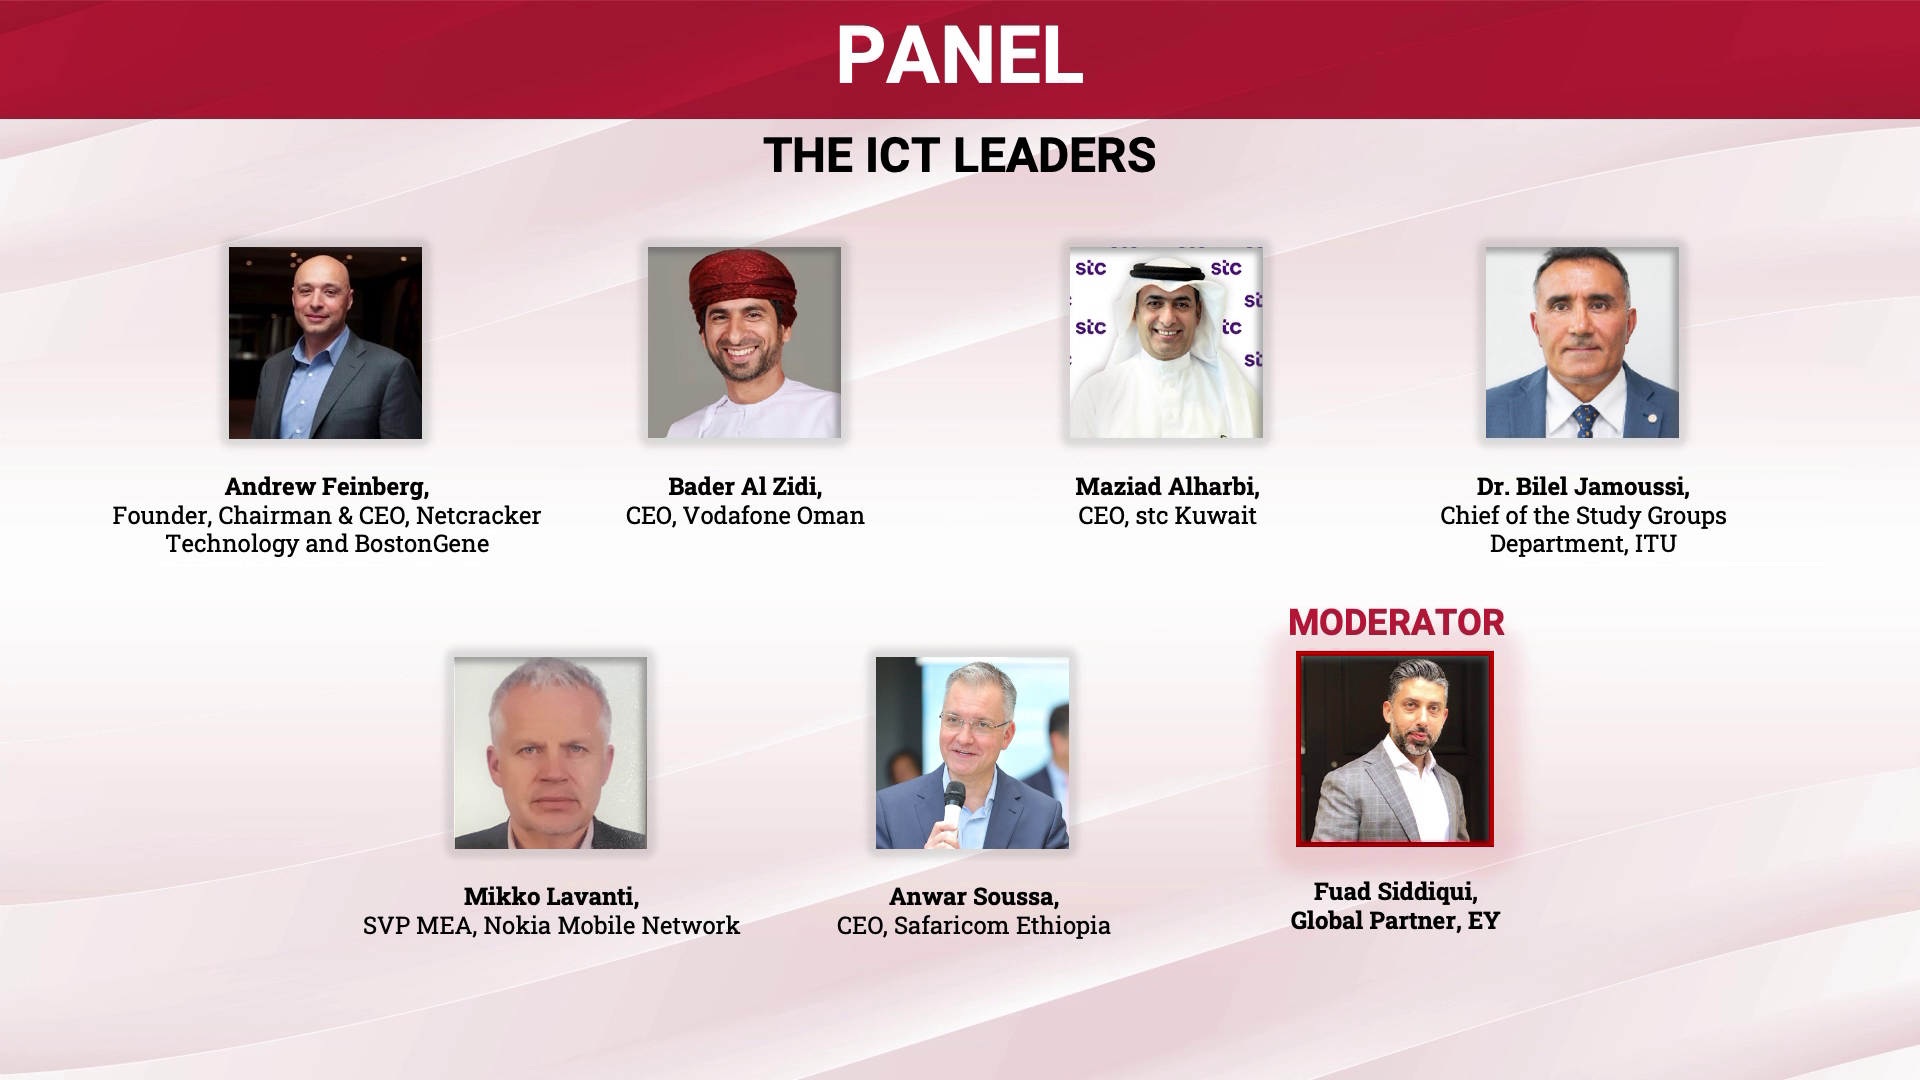 PANEL: THE ICT LEADERS